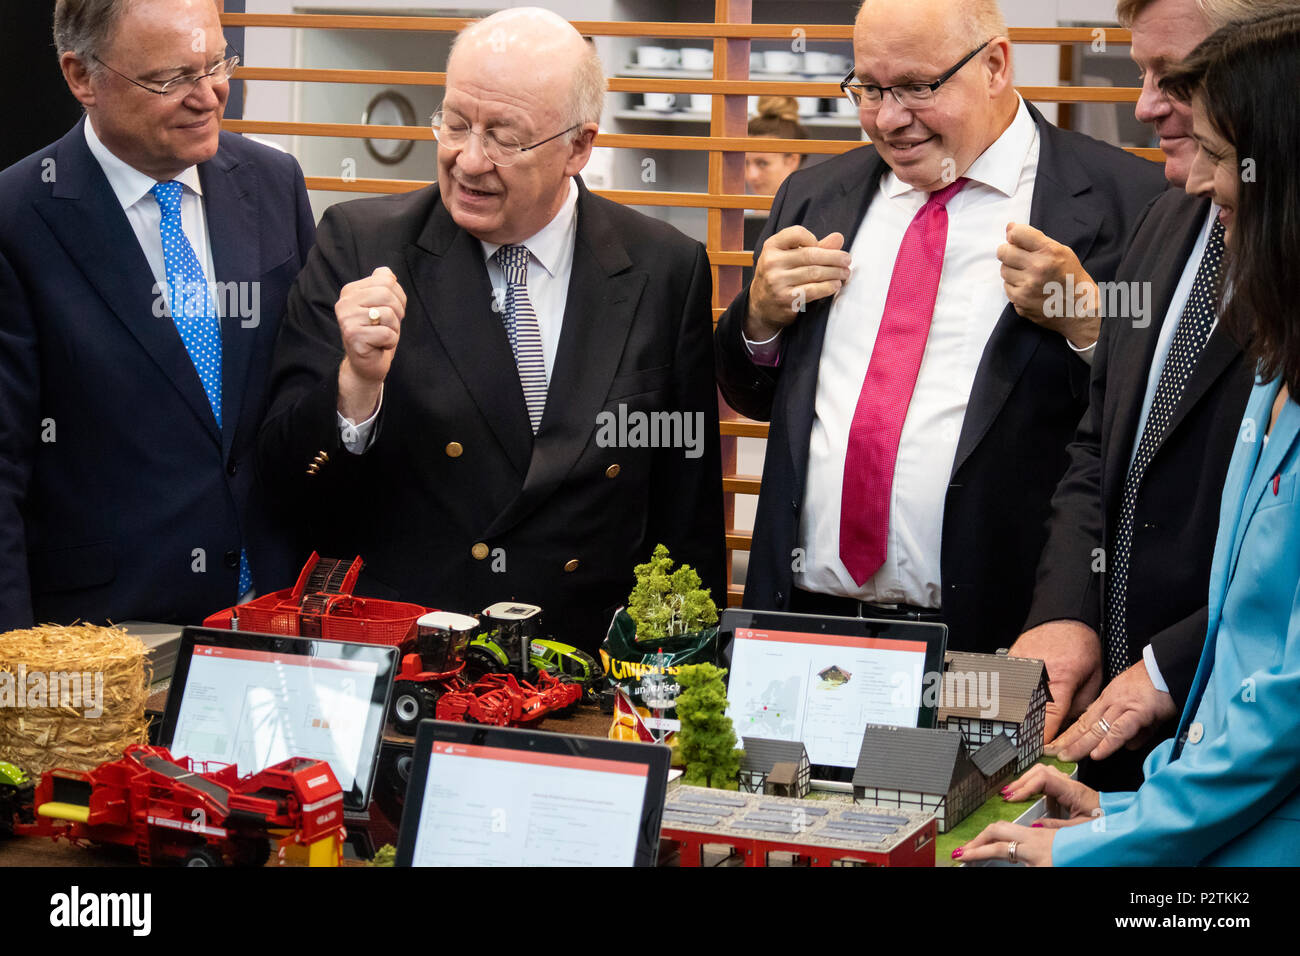 Hannover, Germany. 12th June, 2018. CEBIT 2018 opening walk with Peter Altmaier (3rd L), Federal Minister for Economic Affairs and Energy Germany. Talking about Smart Farming at booth of German Research Center for Artificial Intelligence (DFKI) with Prof. Wolfgang Wahlster (CEO DFKI, 2nd L) and Stephan Weil (Prime Minister of Lower saxony (1st L). CEBIT 2018, international computer expo and Europe's Business Festival for Innovation and Digitization. Credit: Christian Lademann Stock Photo